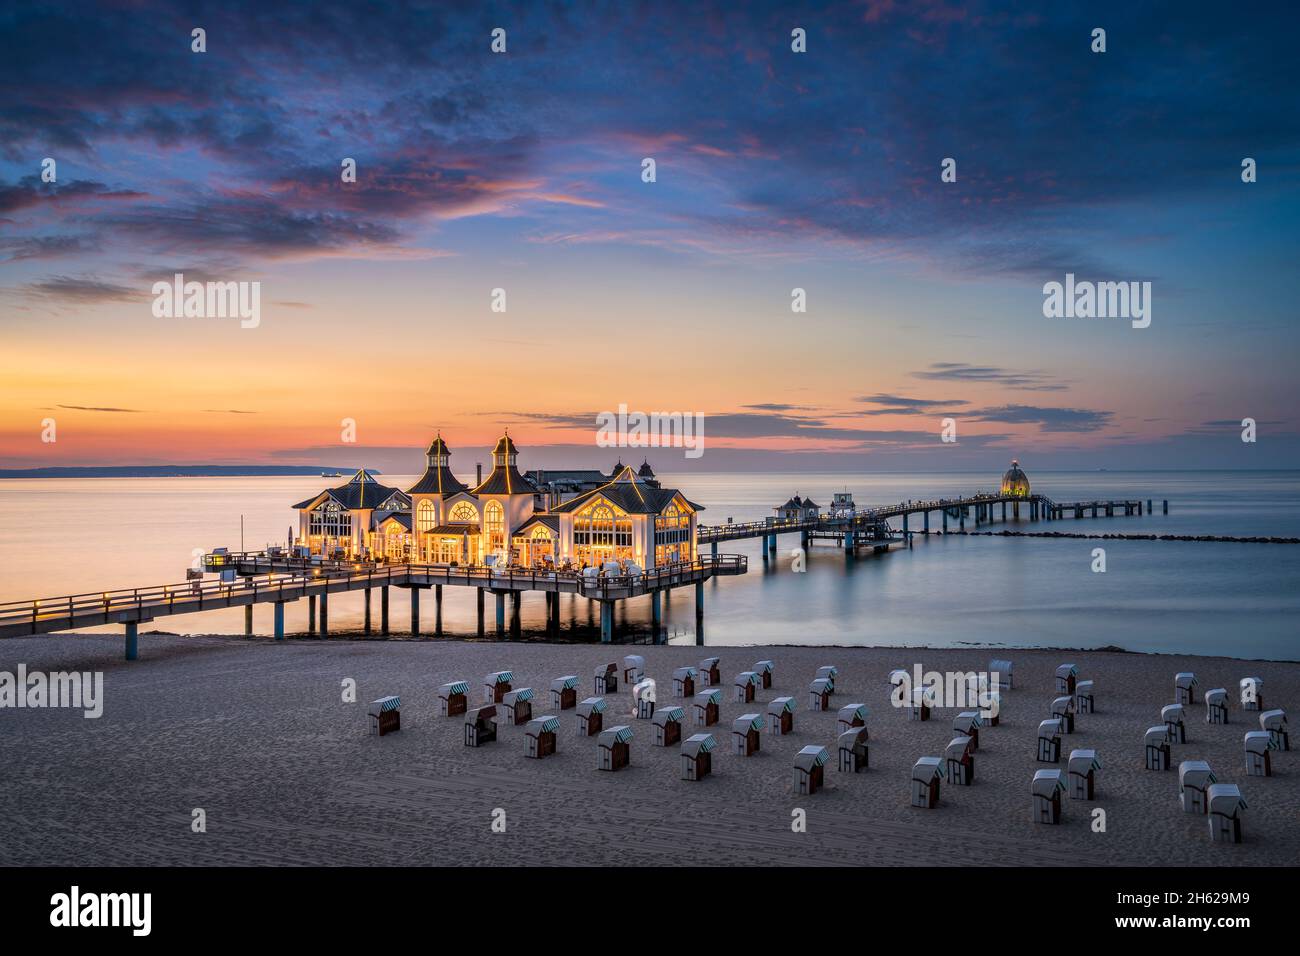 sunset at the sellin pier on the rügen island,germany Stock Photo